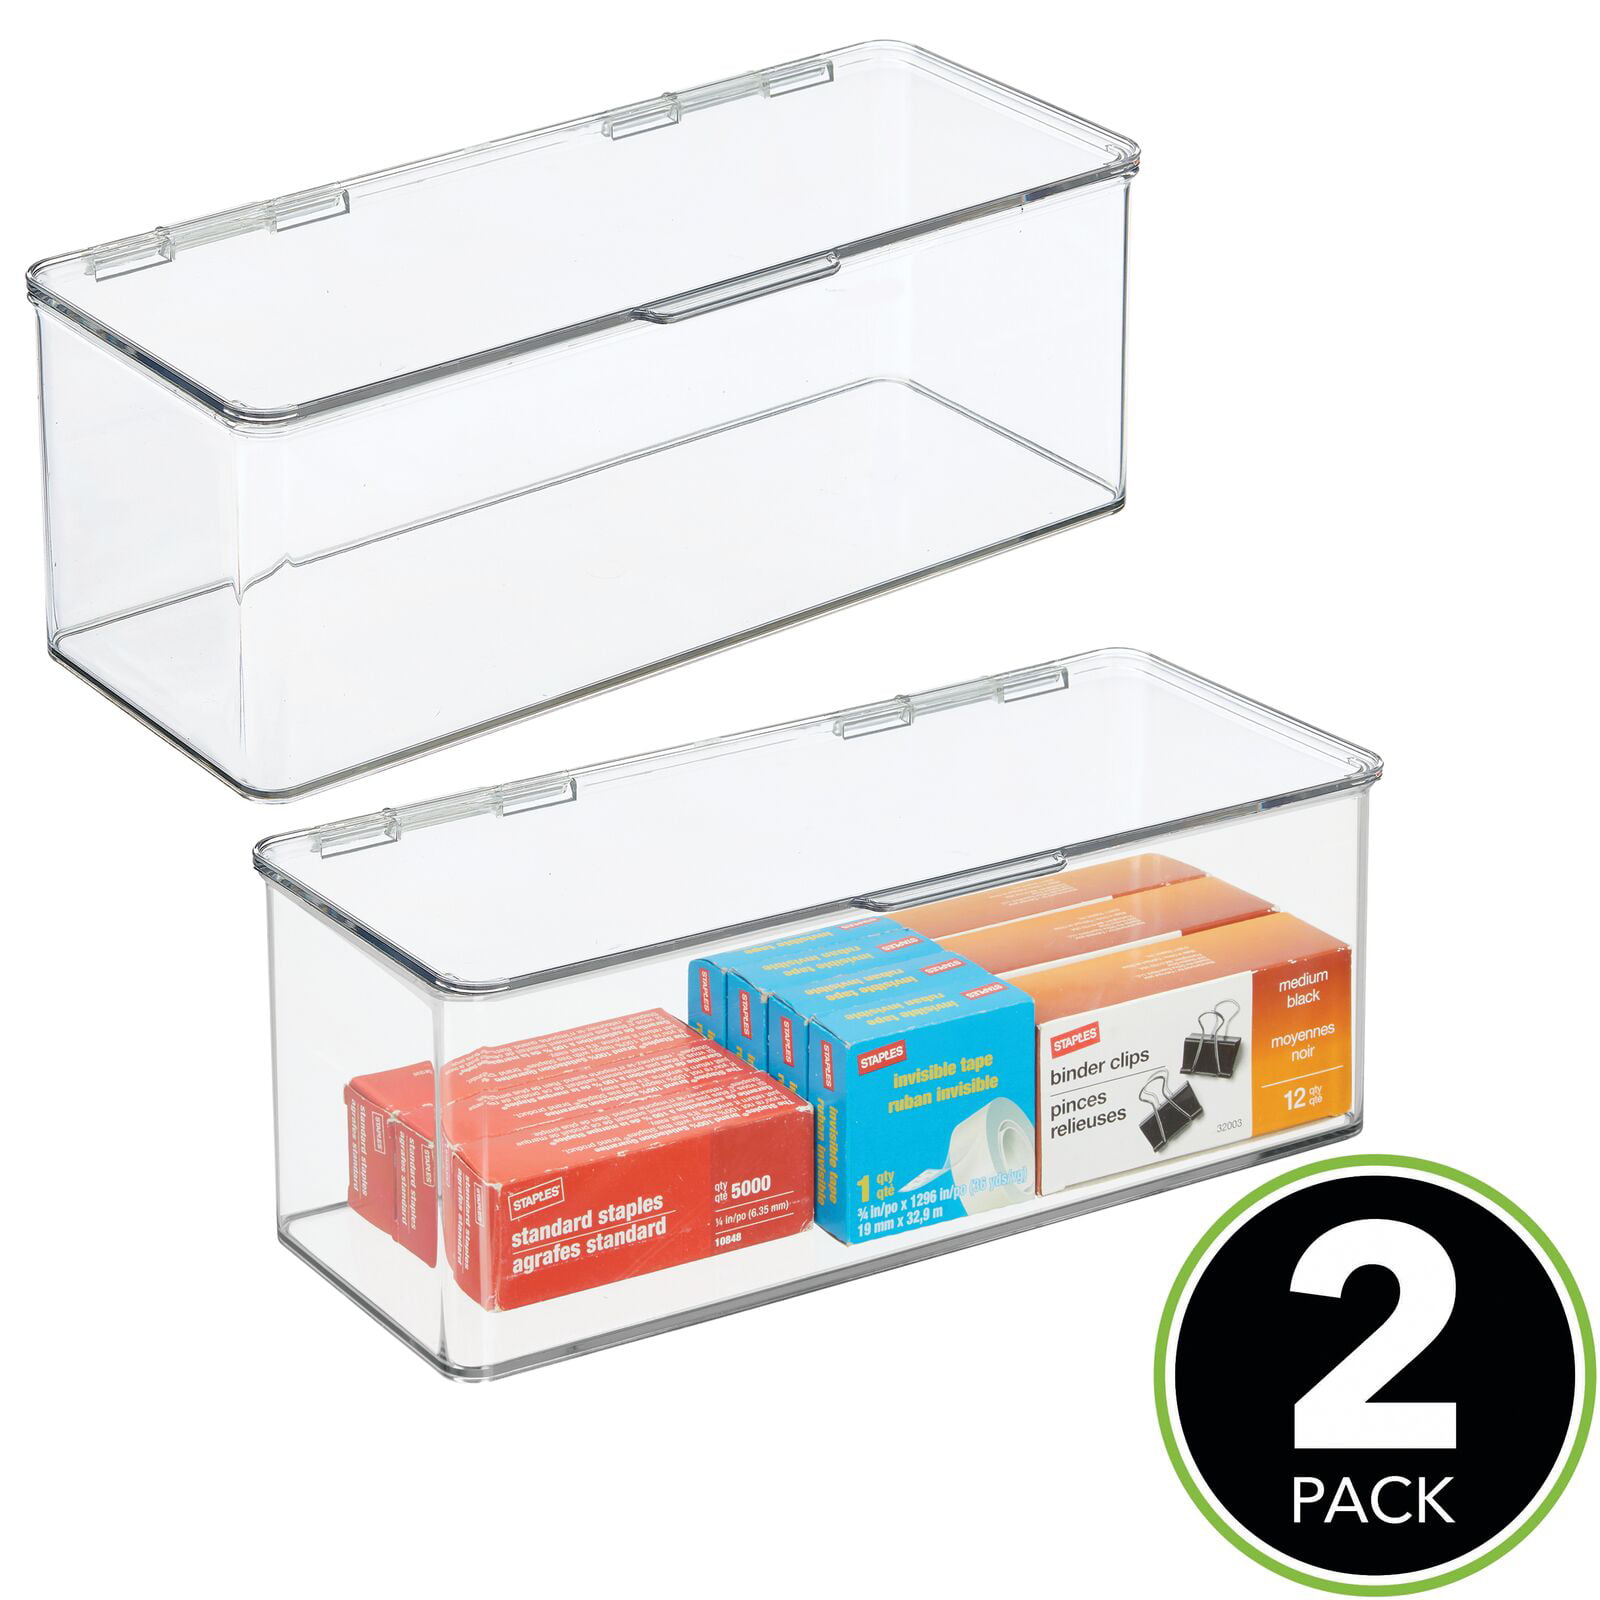 Staples mDesign Plastic Stackable Home Gel Pens Dry Erase Markers Includes 32 Labels Clear Tape 2 Pack Office Supplies Storage Organizer Box with Hinged Lid 7 Inches Tall for Note Pads 